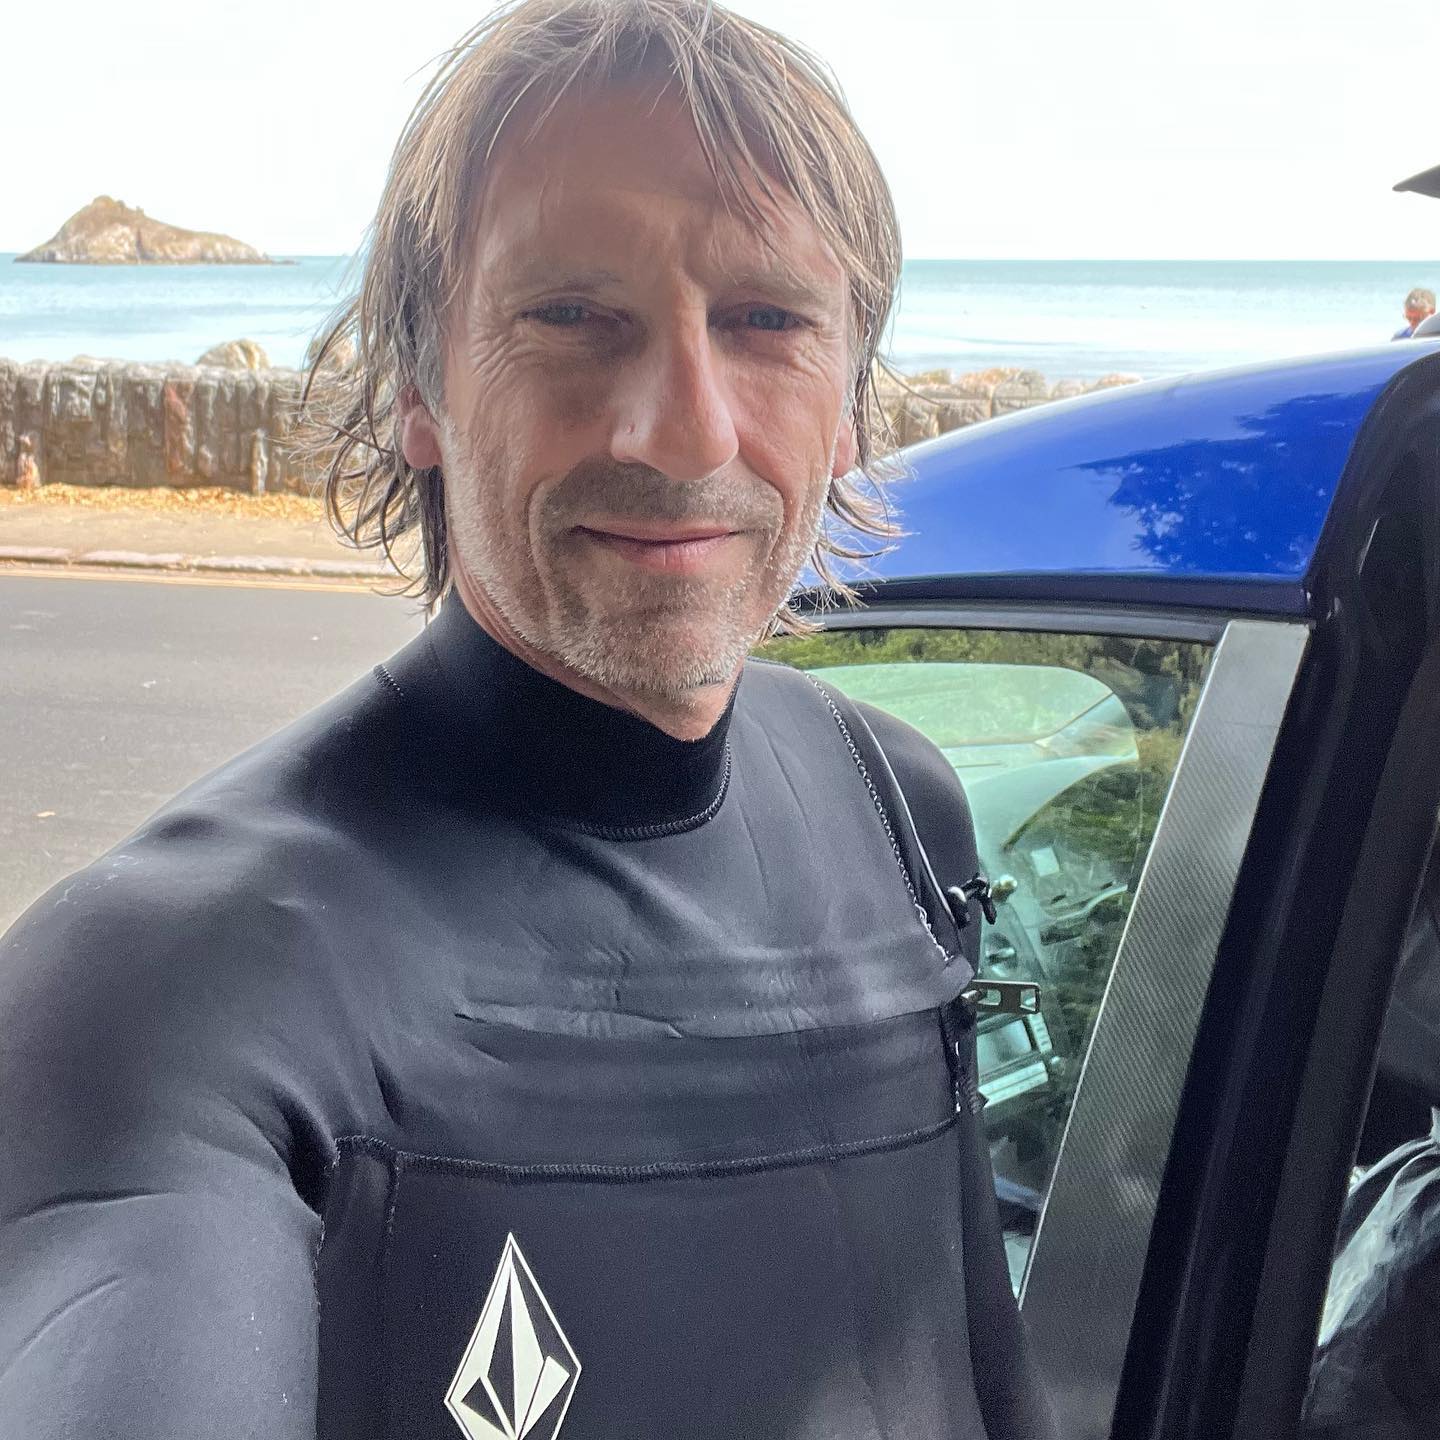 Finally got out on the water for a paddle around a pan flat Meadfoot beach. It’s been quite a few years since I last surfed and need to get the shoulders and spaghetti arms ready for the shock of paddling in actual waves very soon. Also needed to get used to being in a wetsuit again.  #surfing #surfinglife #paddleout #volcomsurf #truetothis #volcom